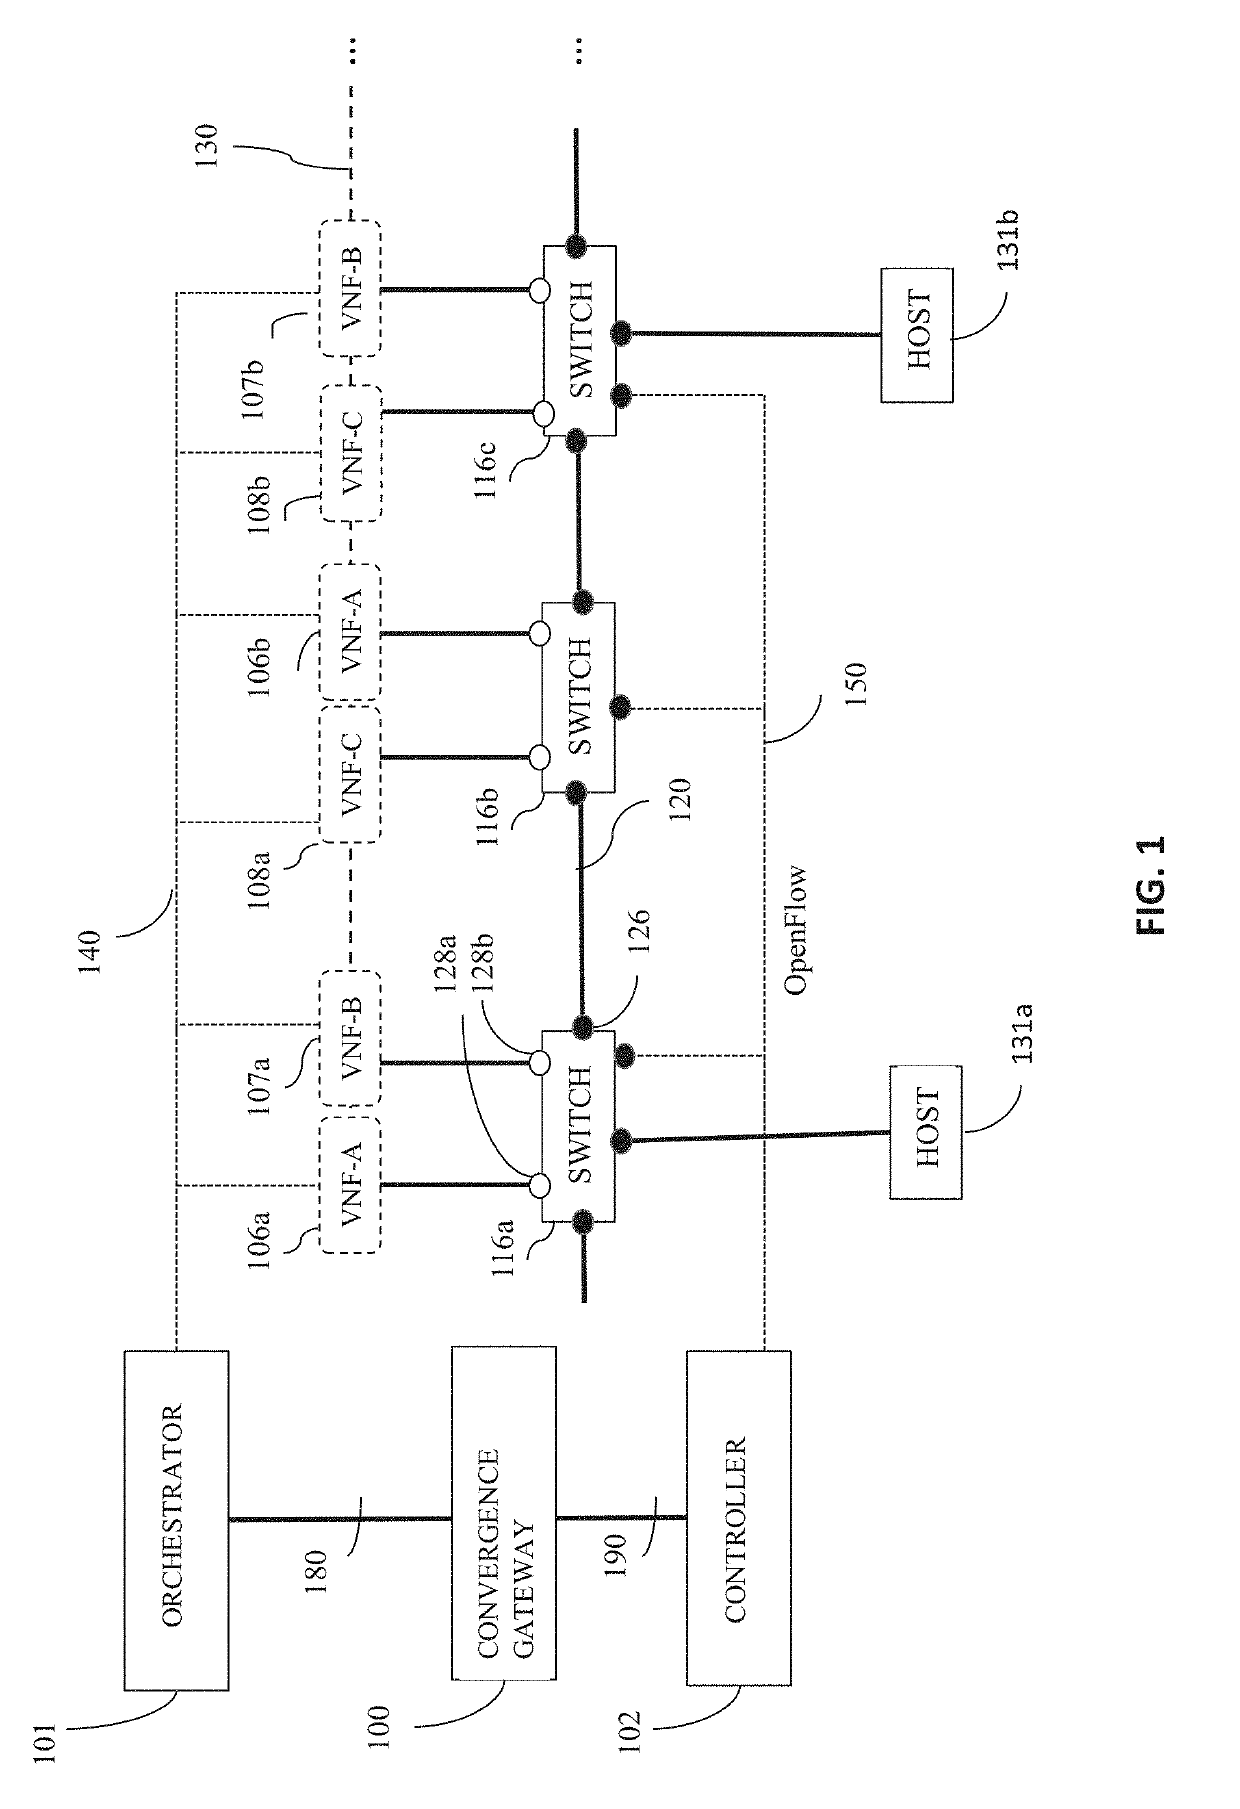 System and method for elastic scaling of virtualized network functions over a software defined network